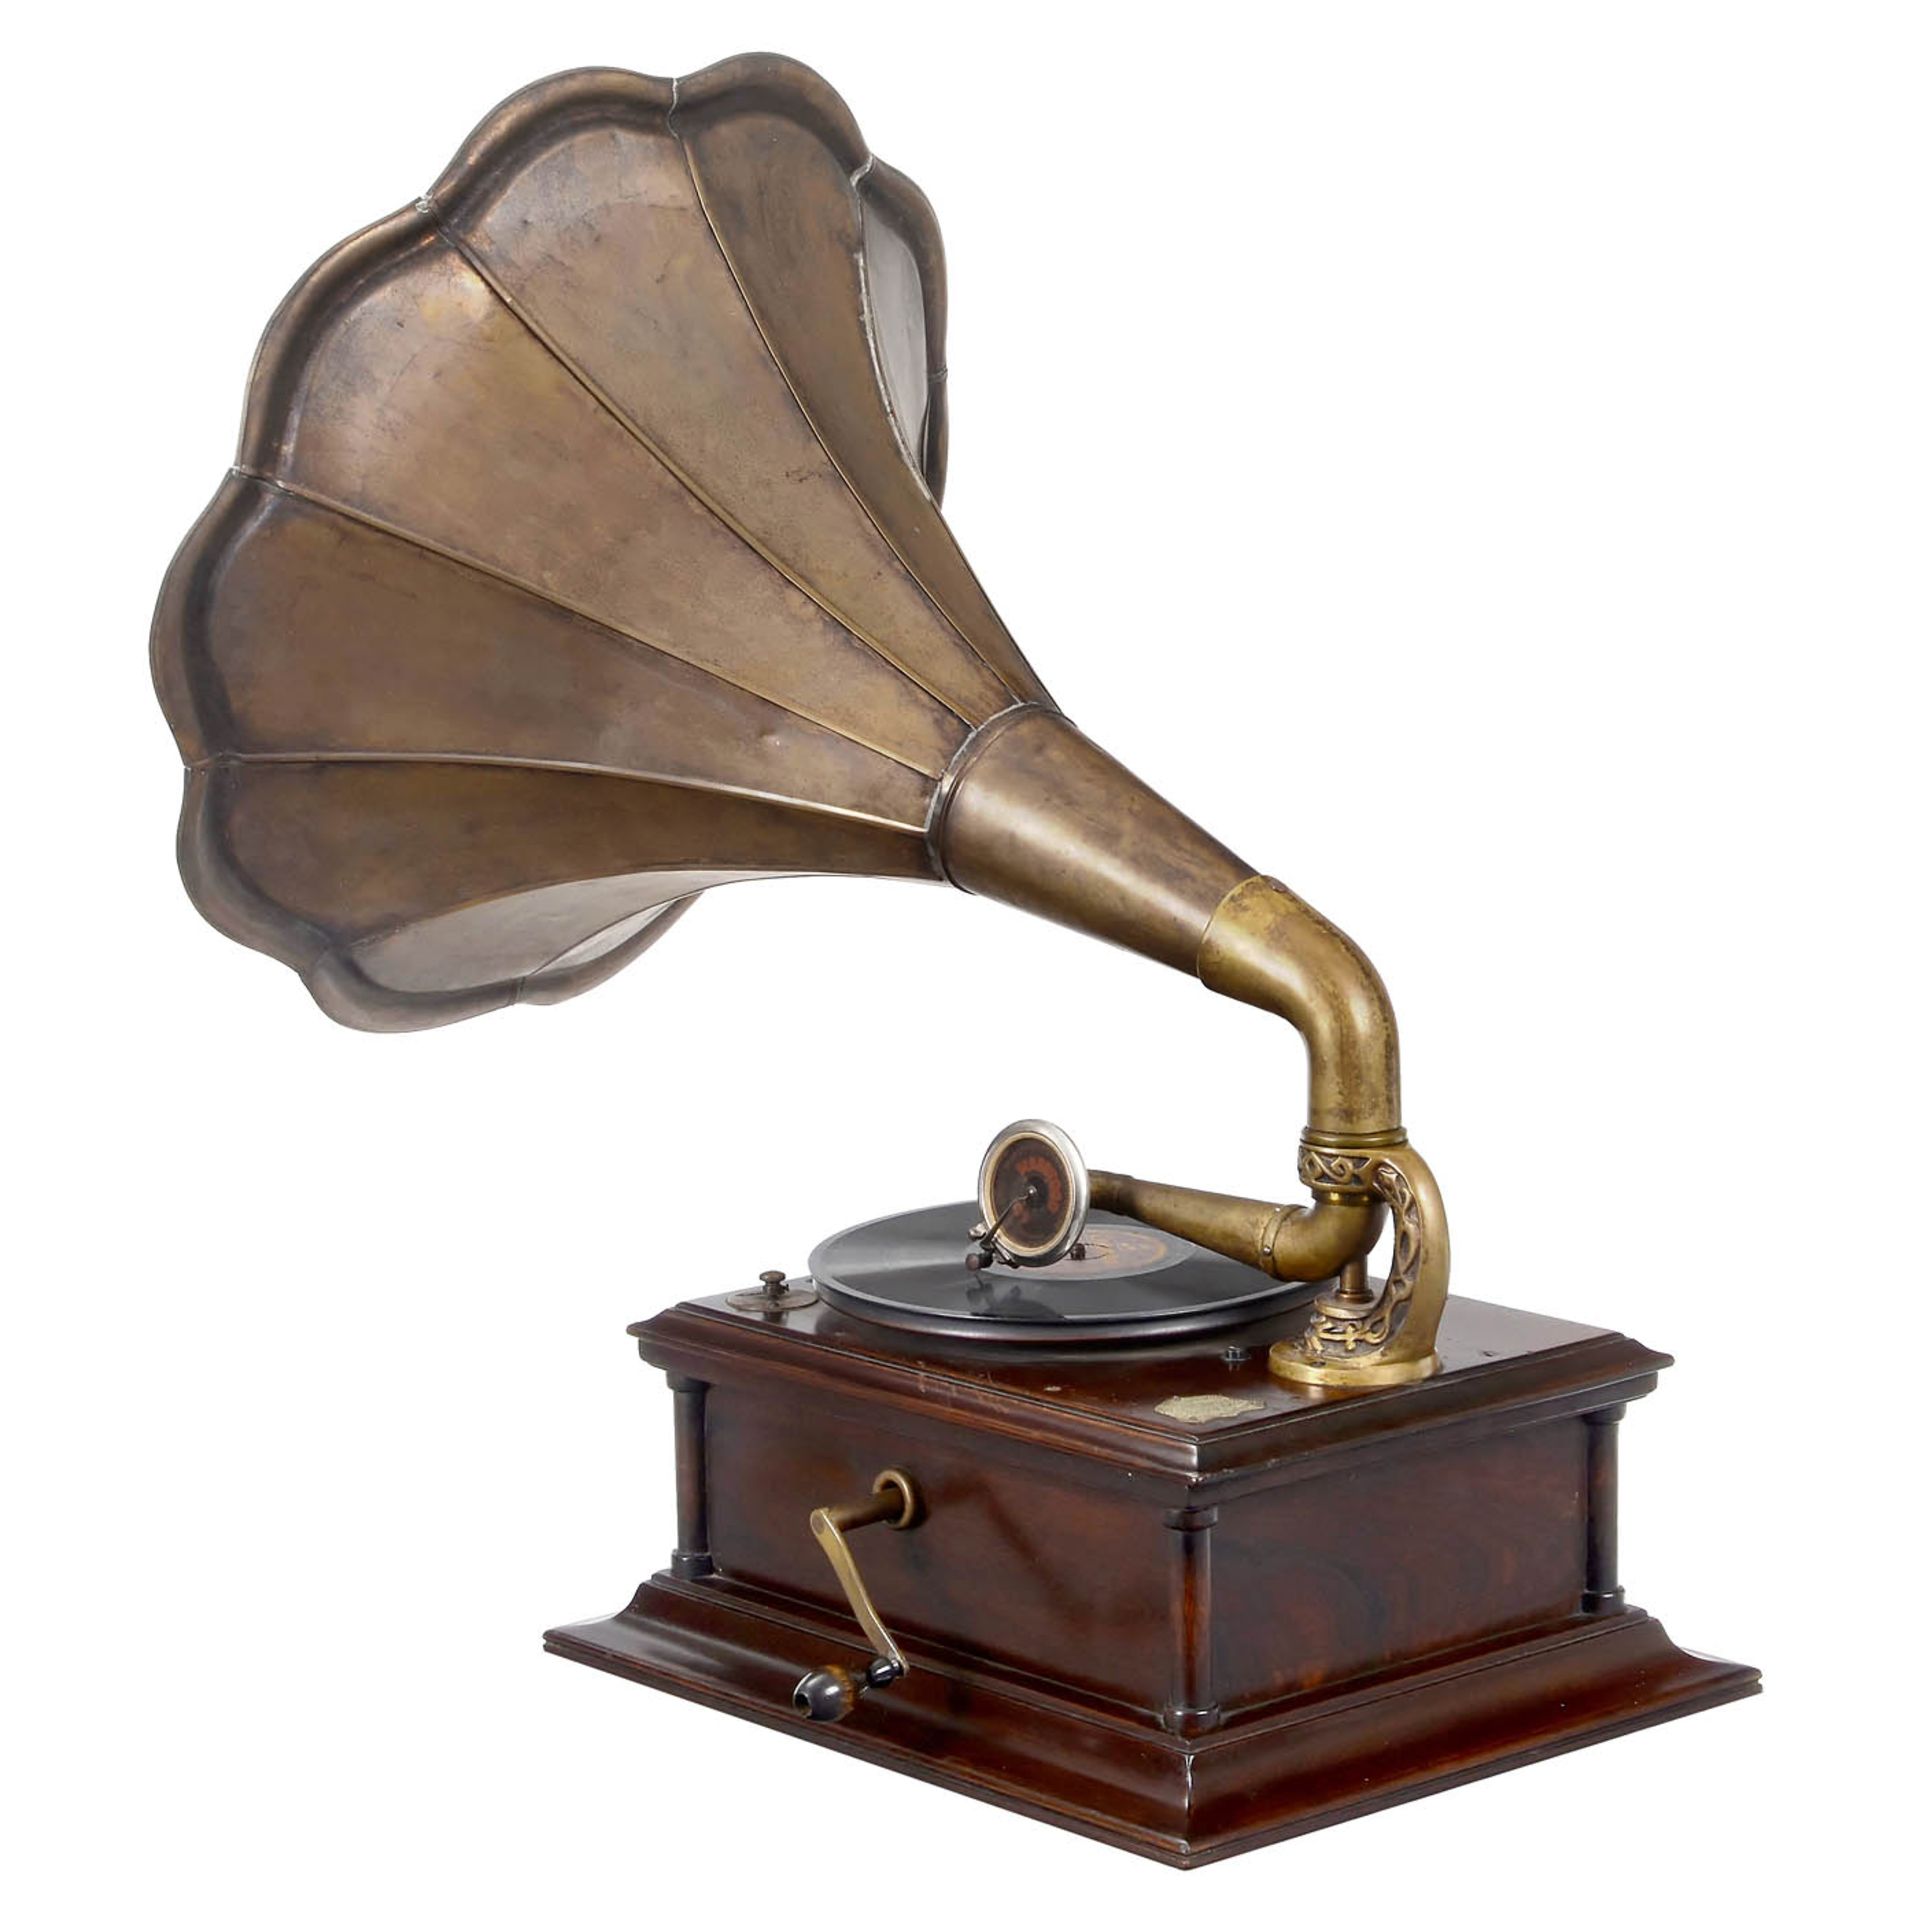 Rare Traveling-Horn Gramophone by Bohland & Fuchs, c. 1905 - Image 3 of 4